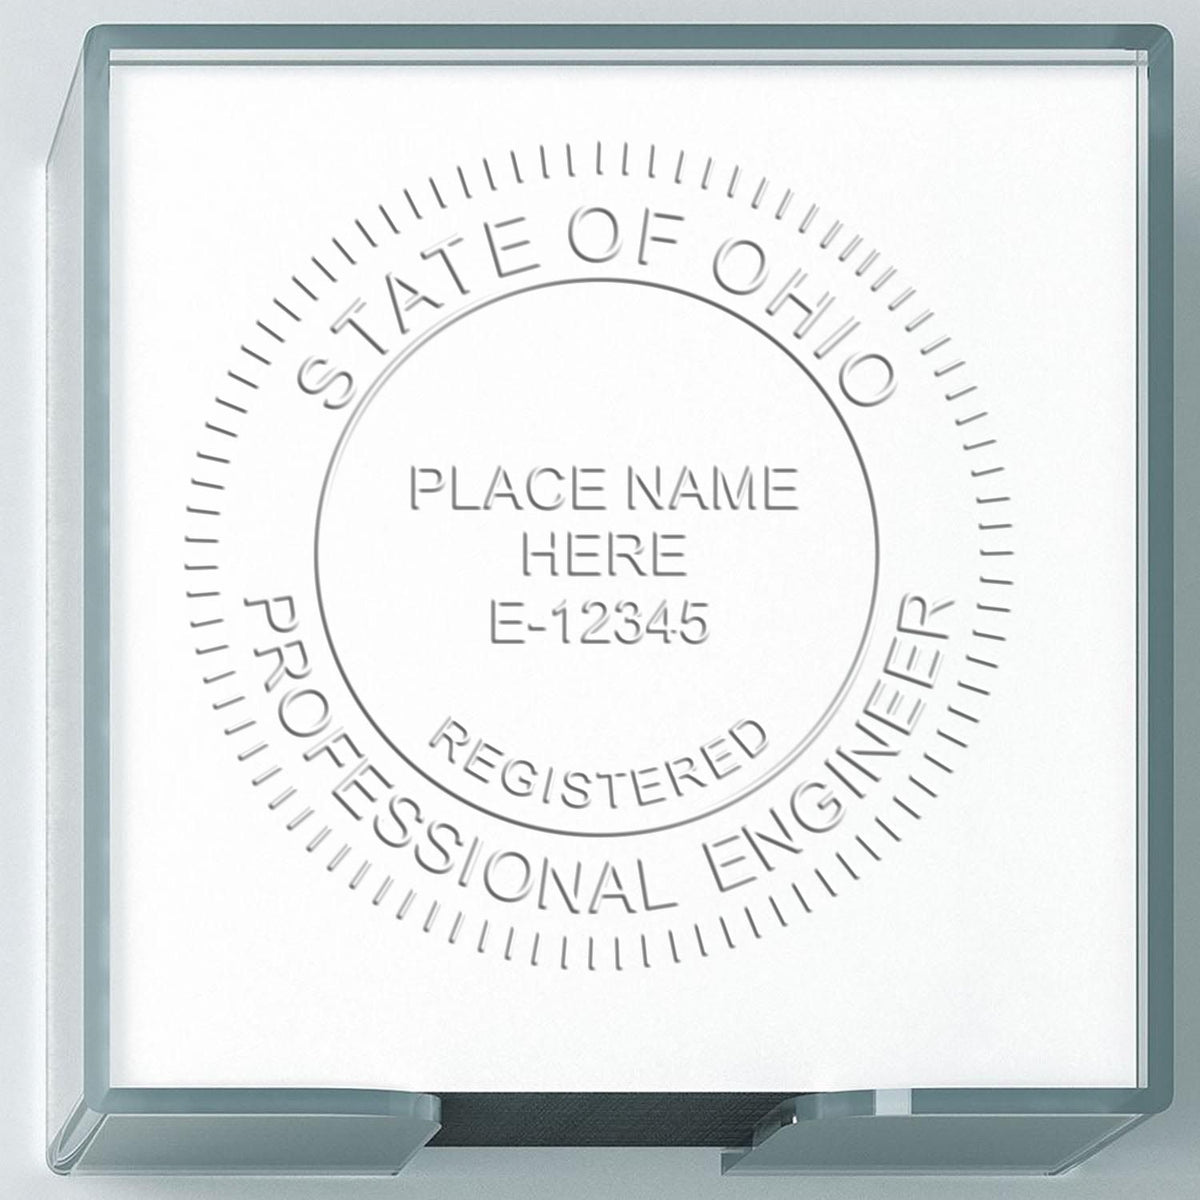 An in use photo of the Hybrid Ohio Engineer Seal showing a sample imprint on a cardstock